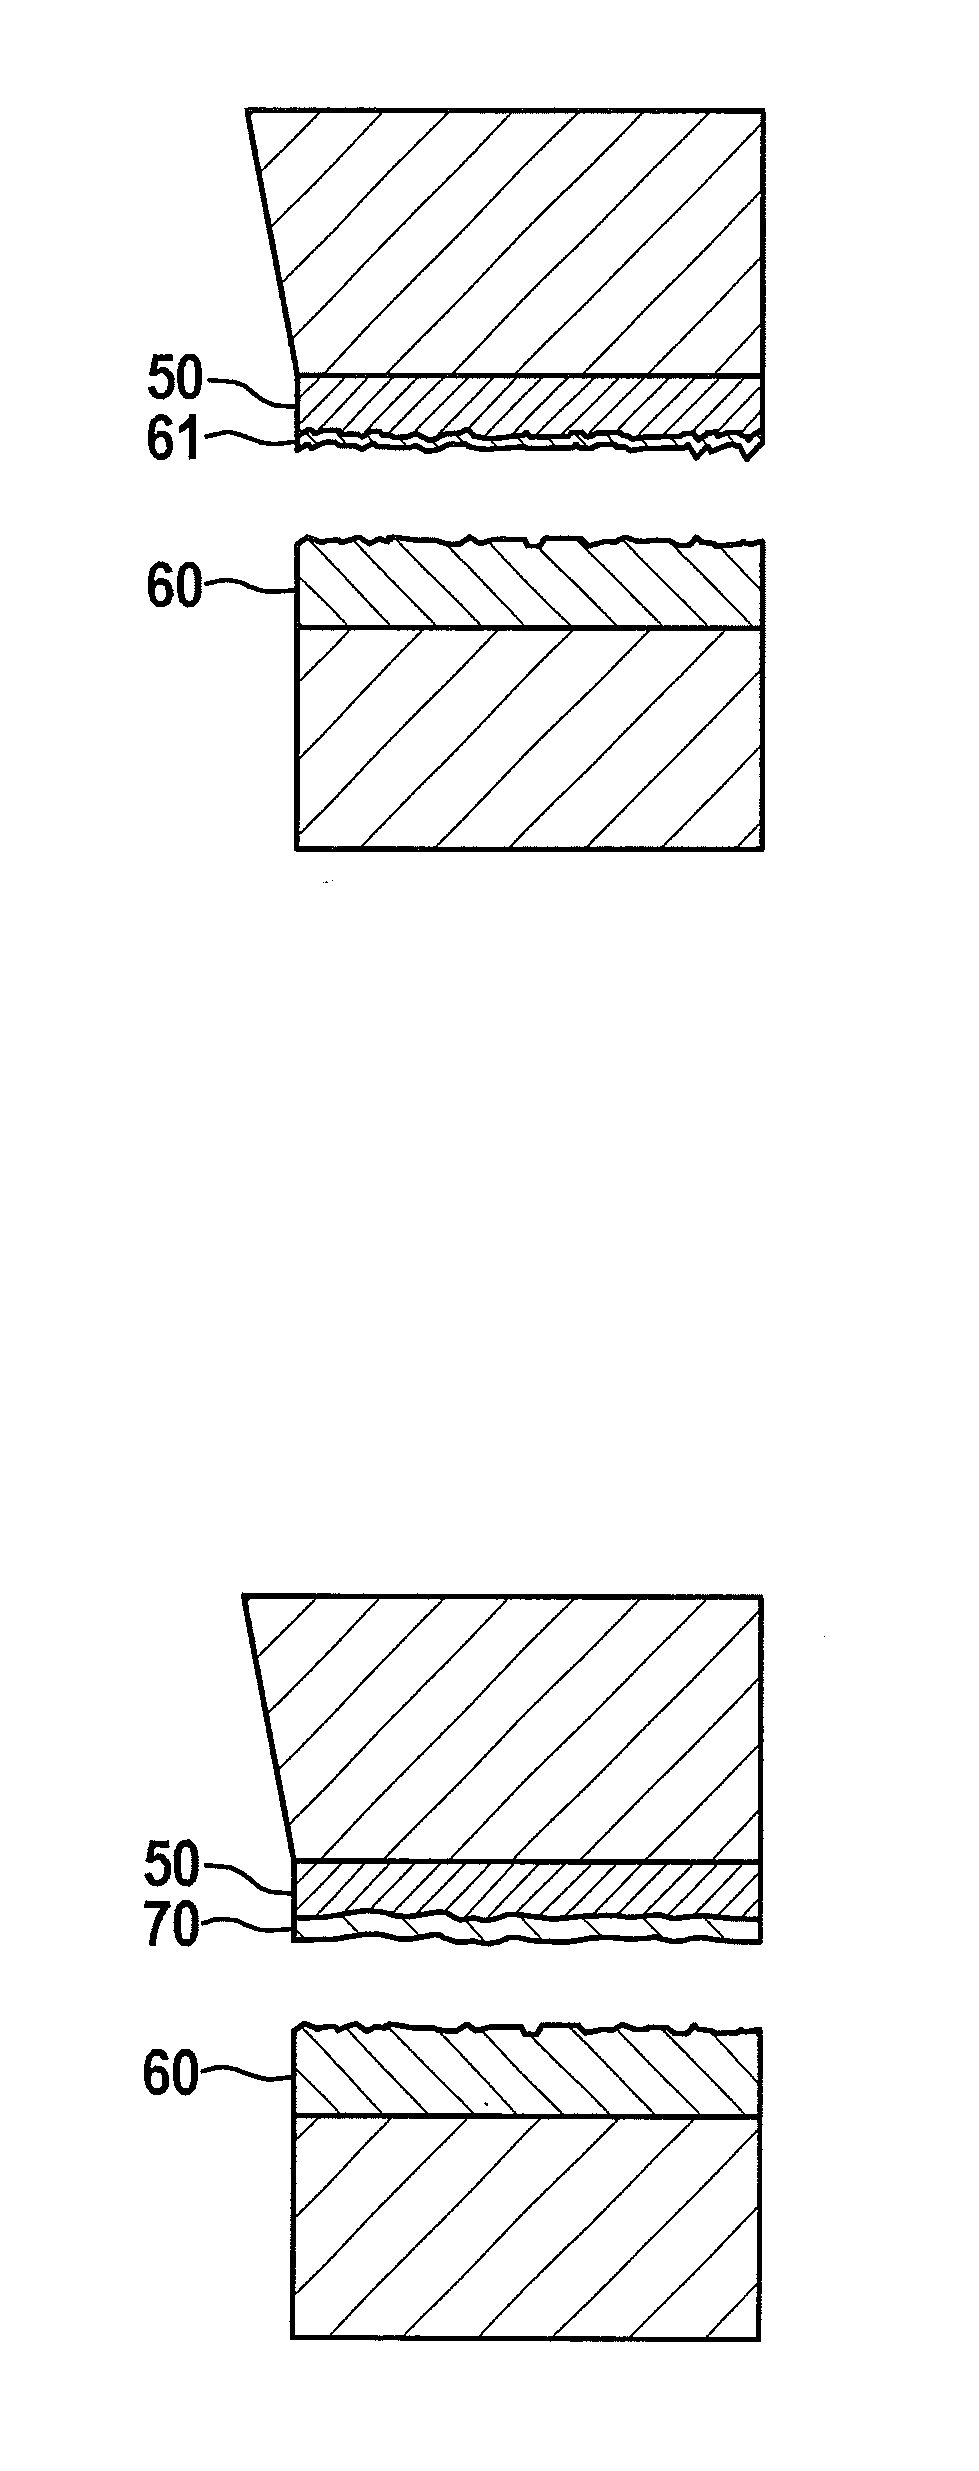 Method for eutectic bonding of two carrier devices